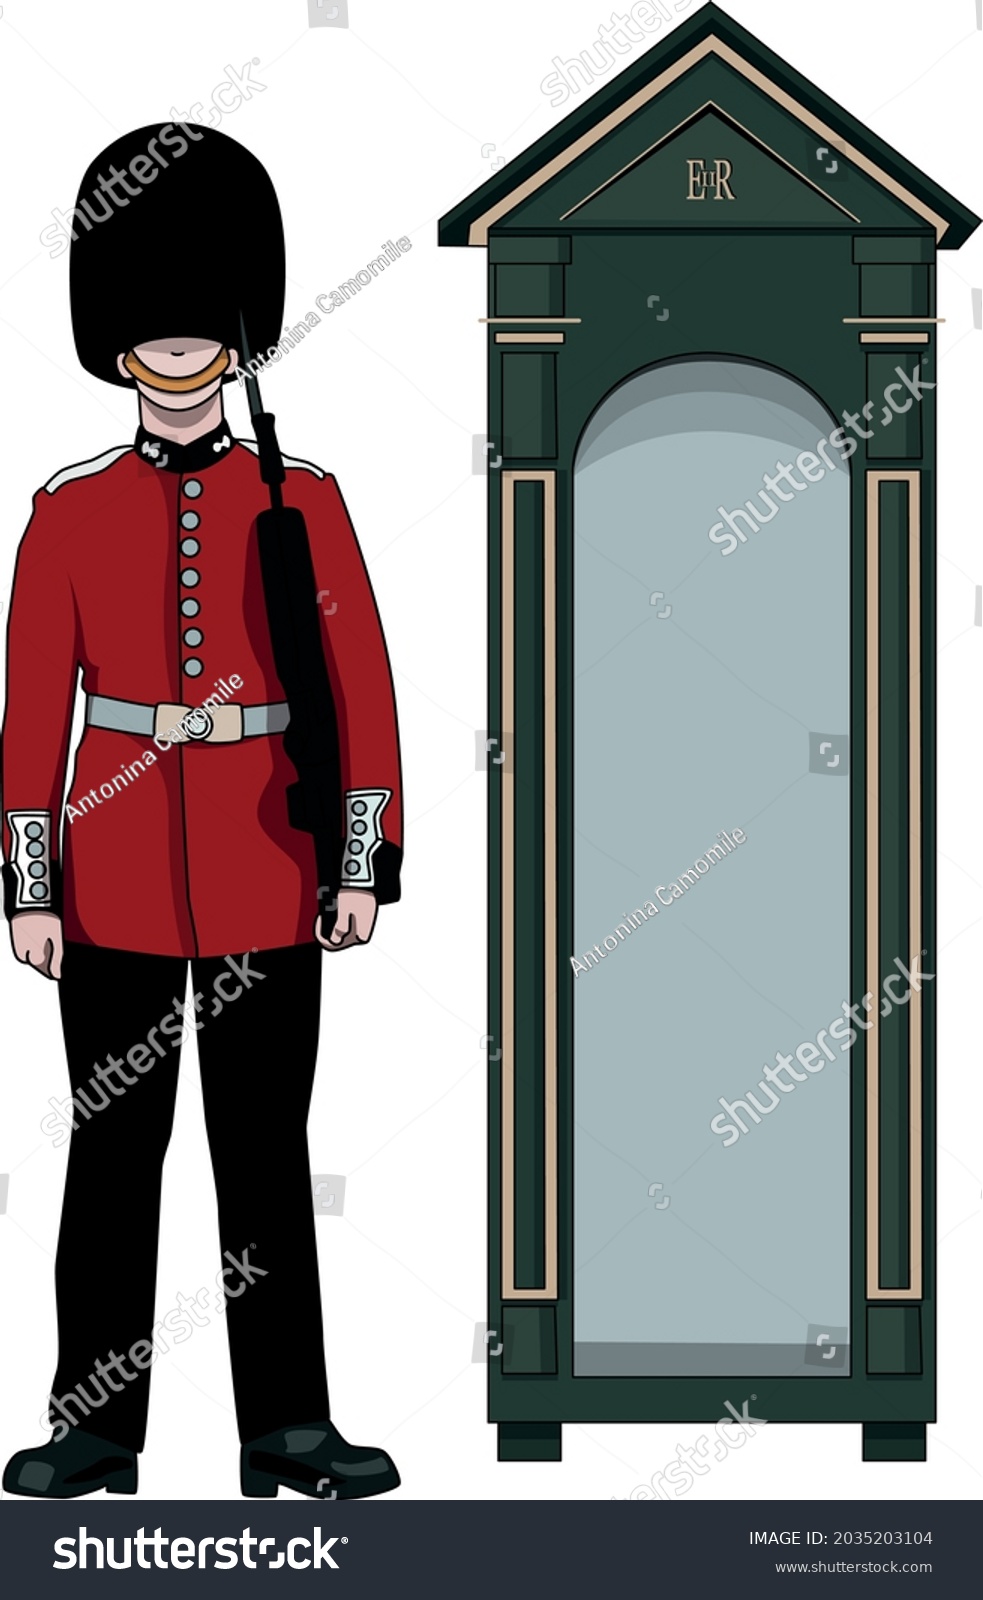 SVG of British Royal Guardsman at Buckingham Palace in London in a box on a white background svg